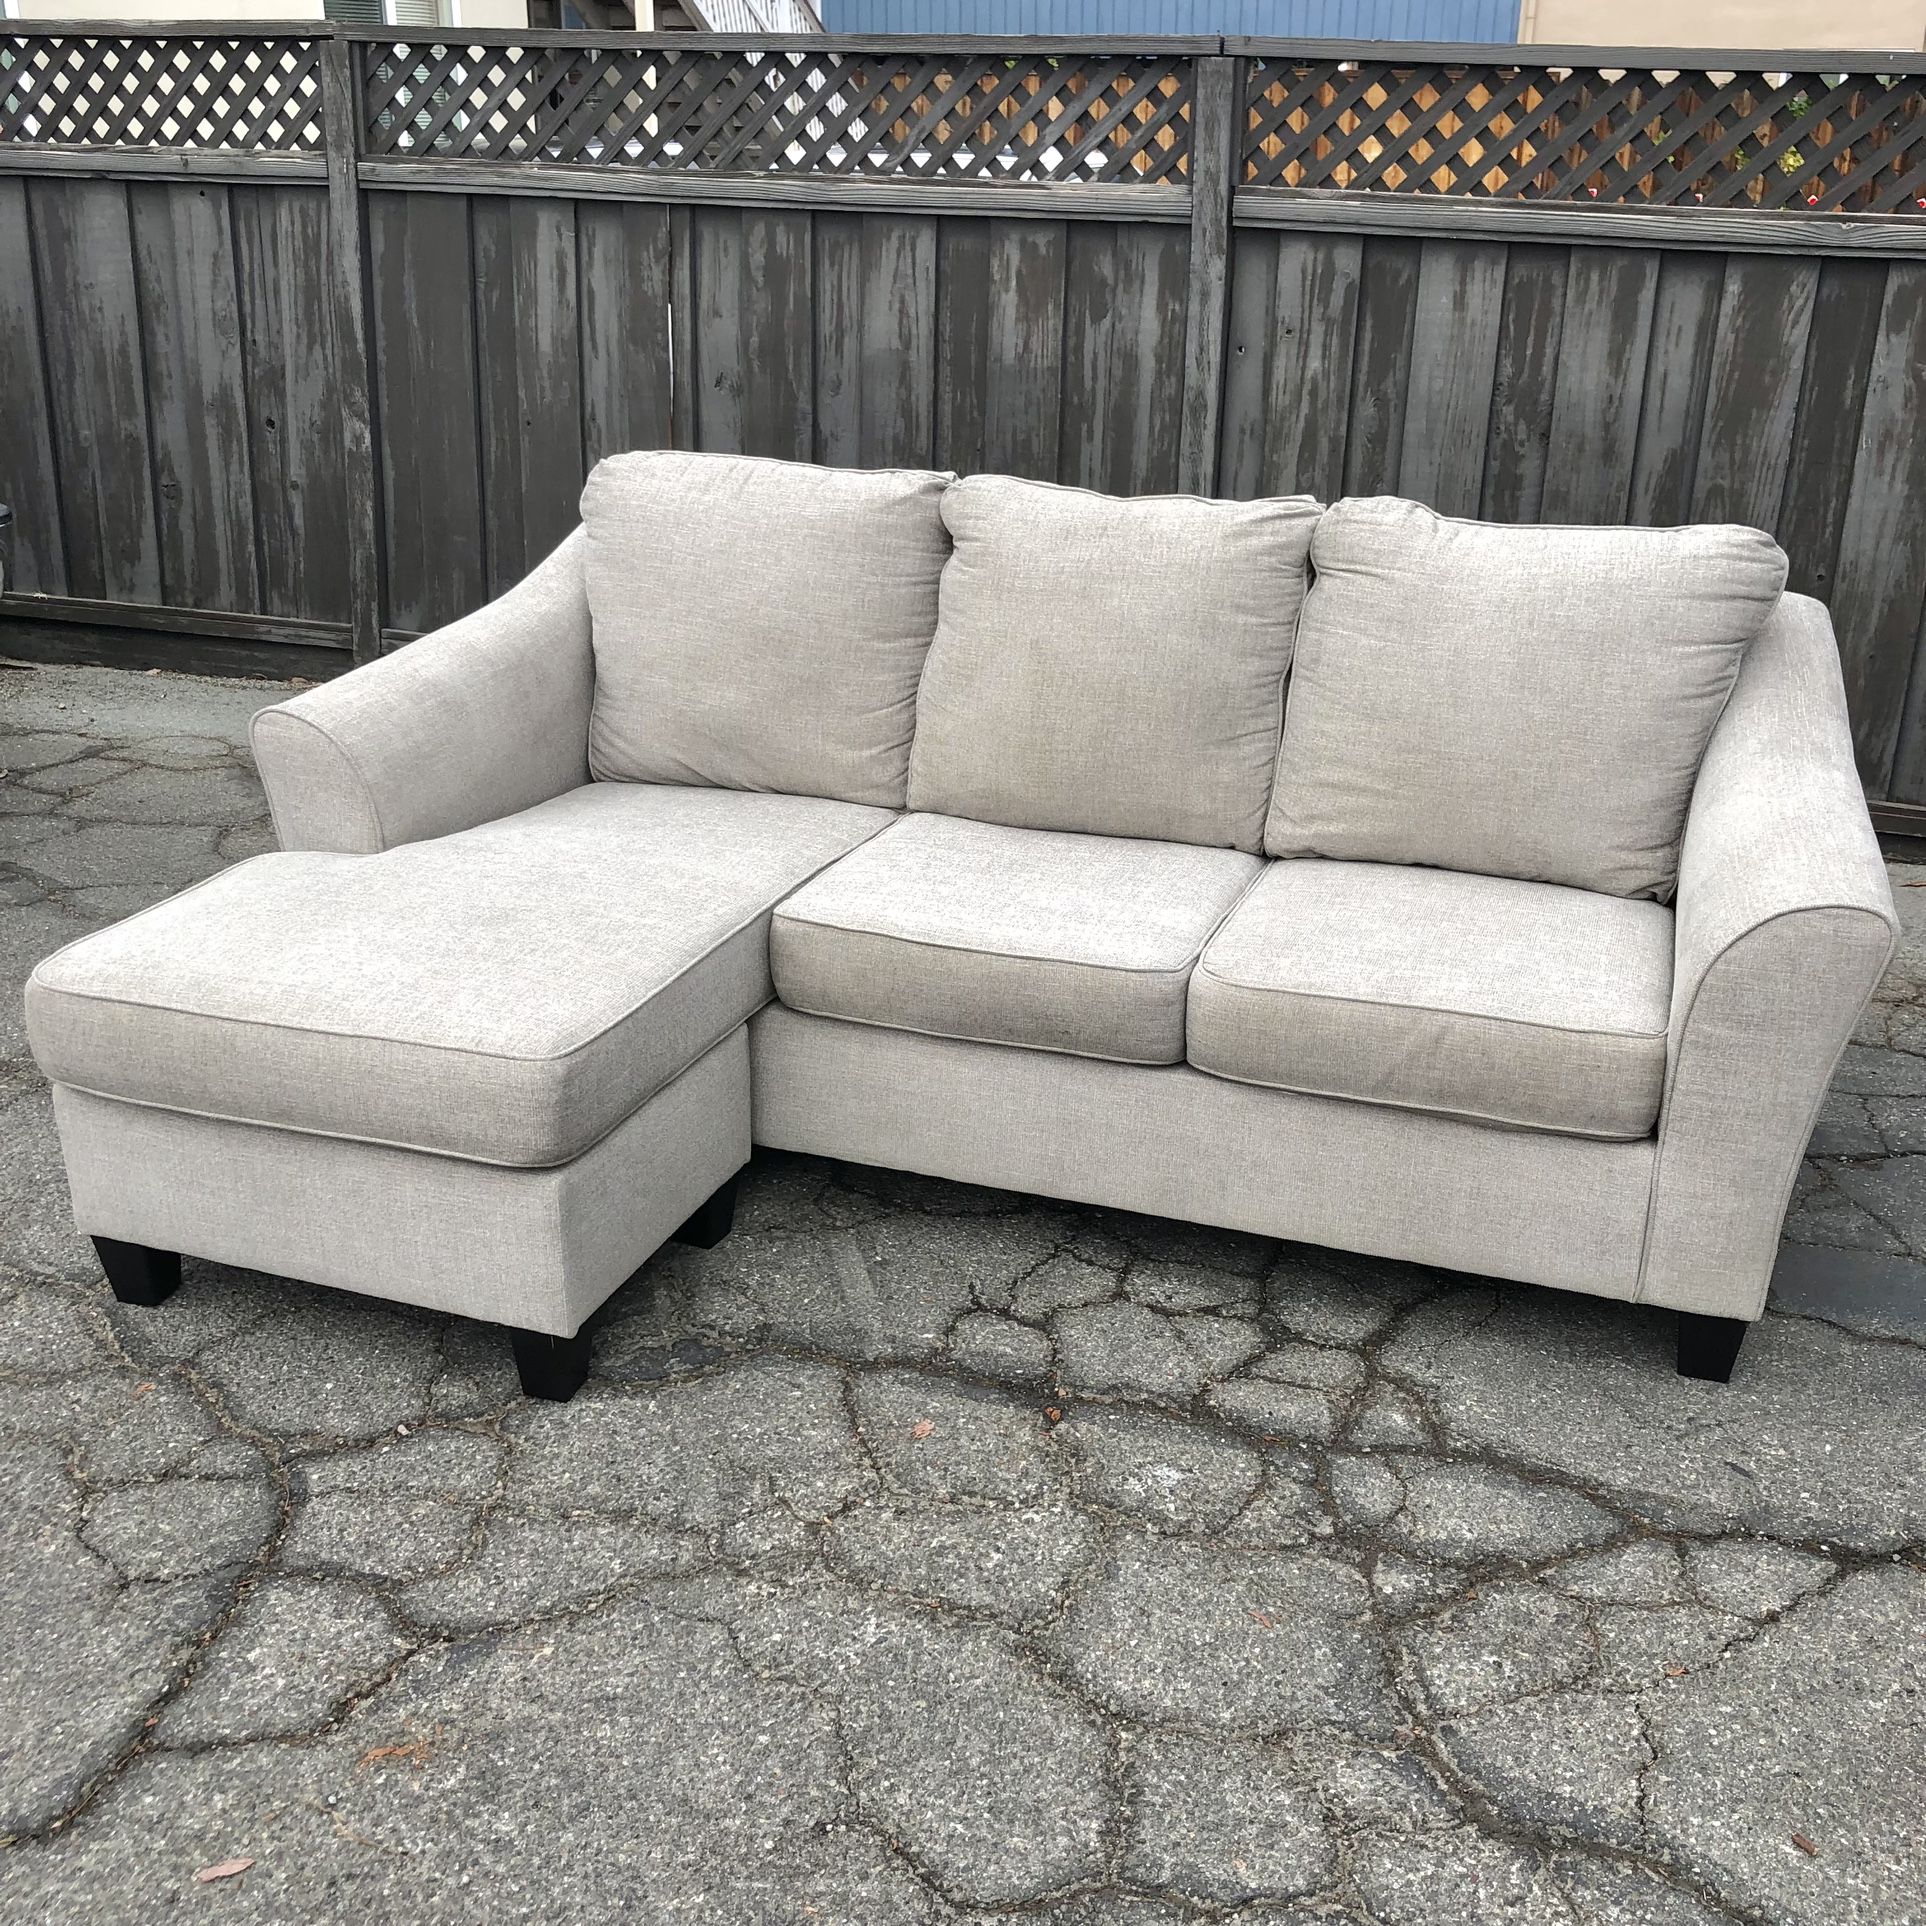 Like New - Ashleys Furniture Modern Gray Sectional Sofa Couch w Chaise 🚚 Delivery Available